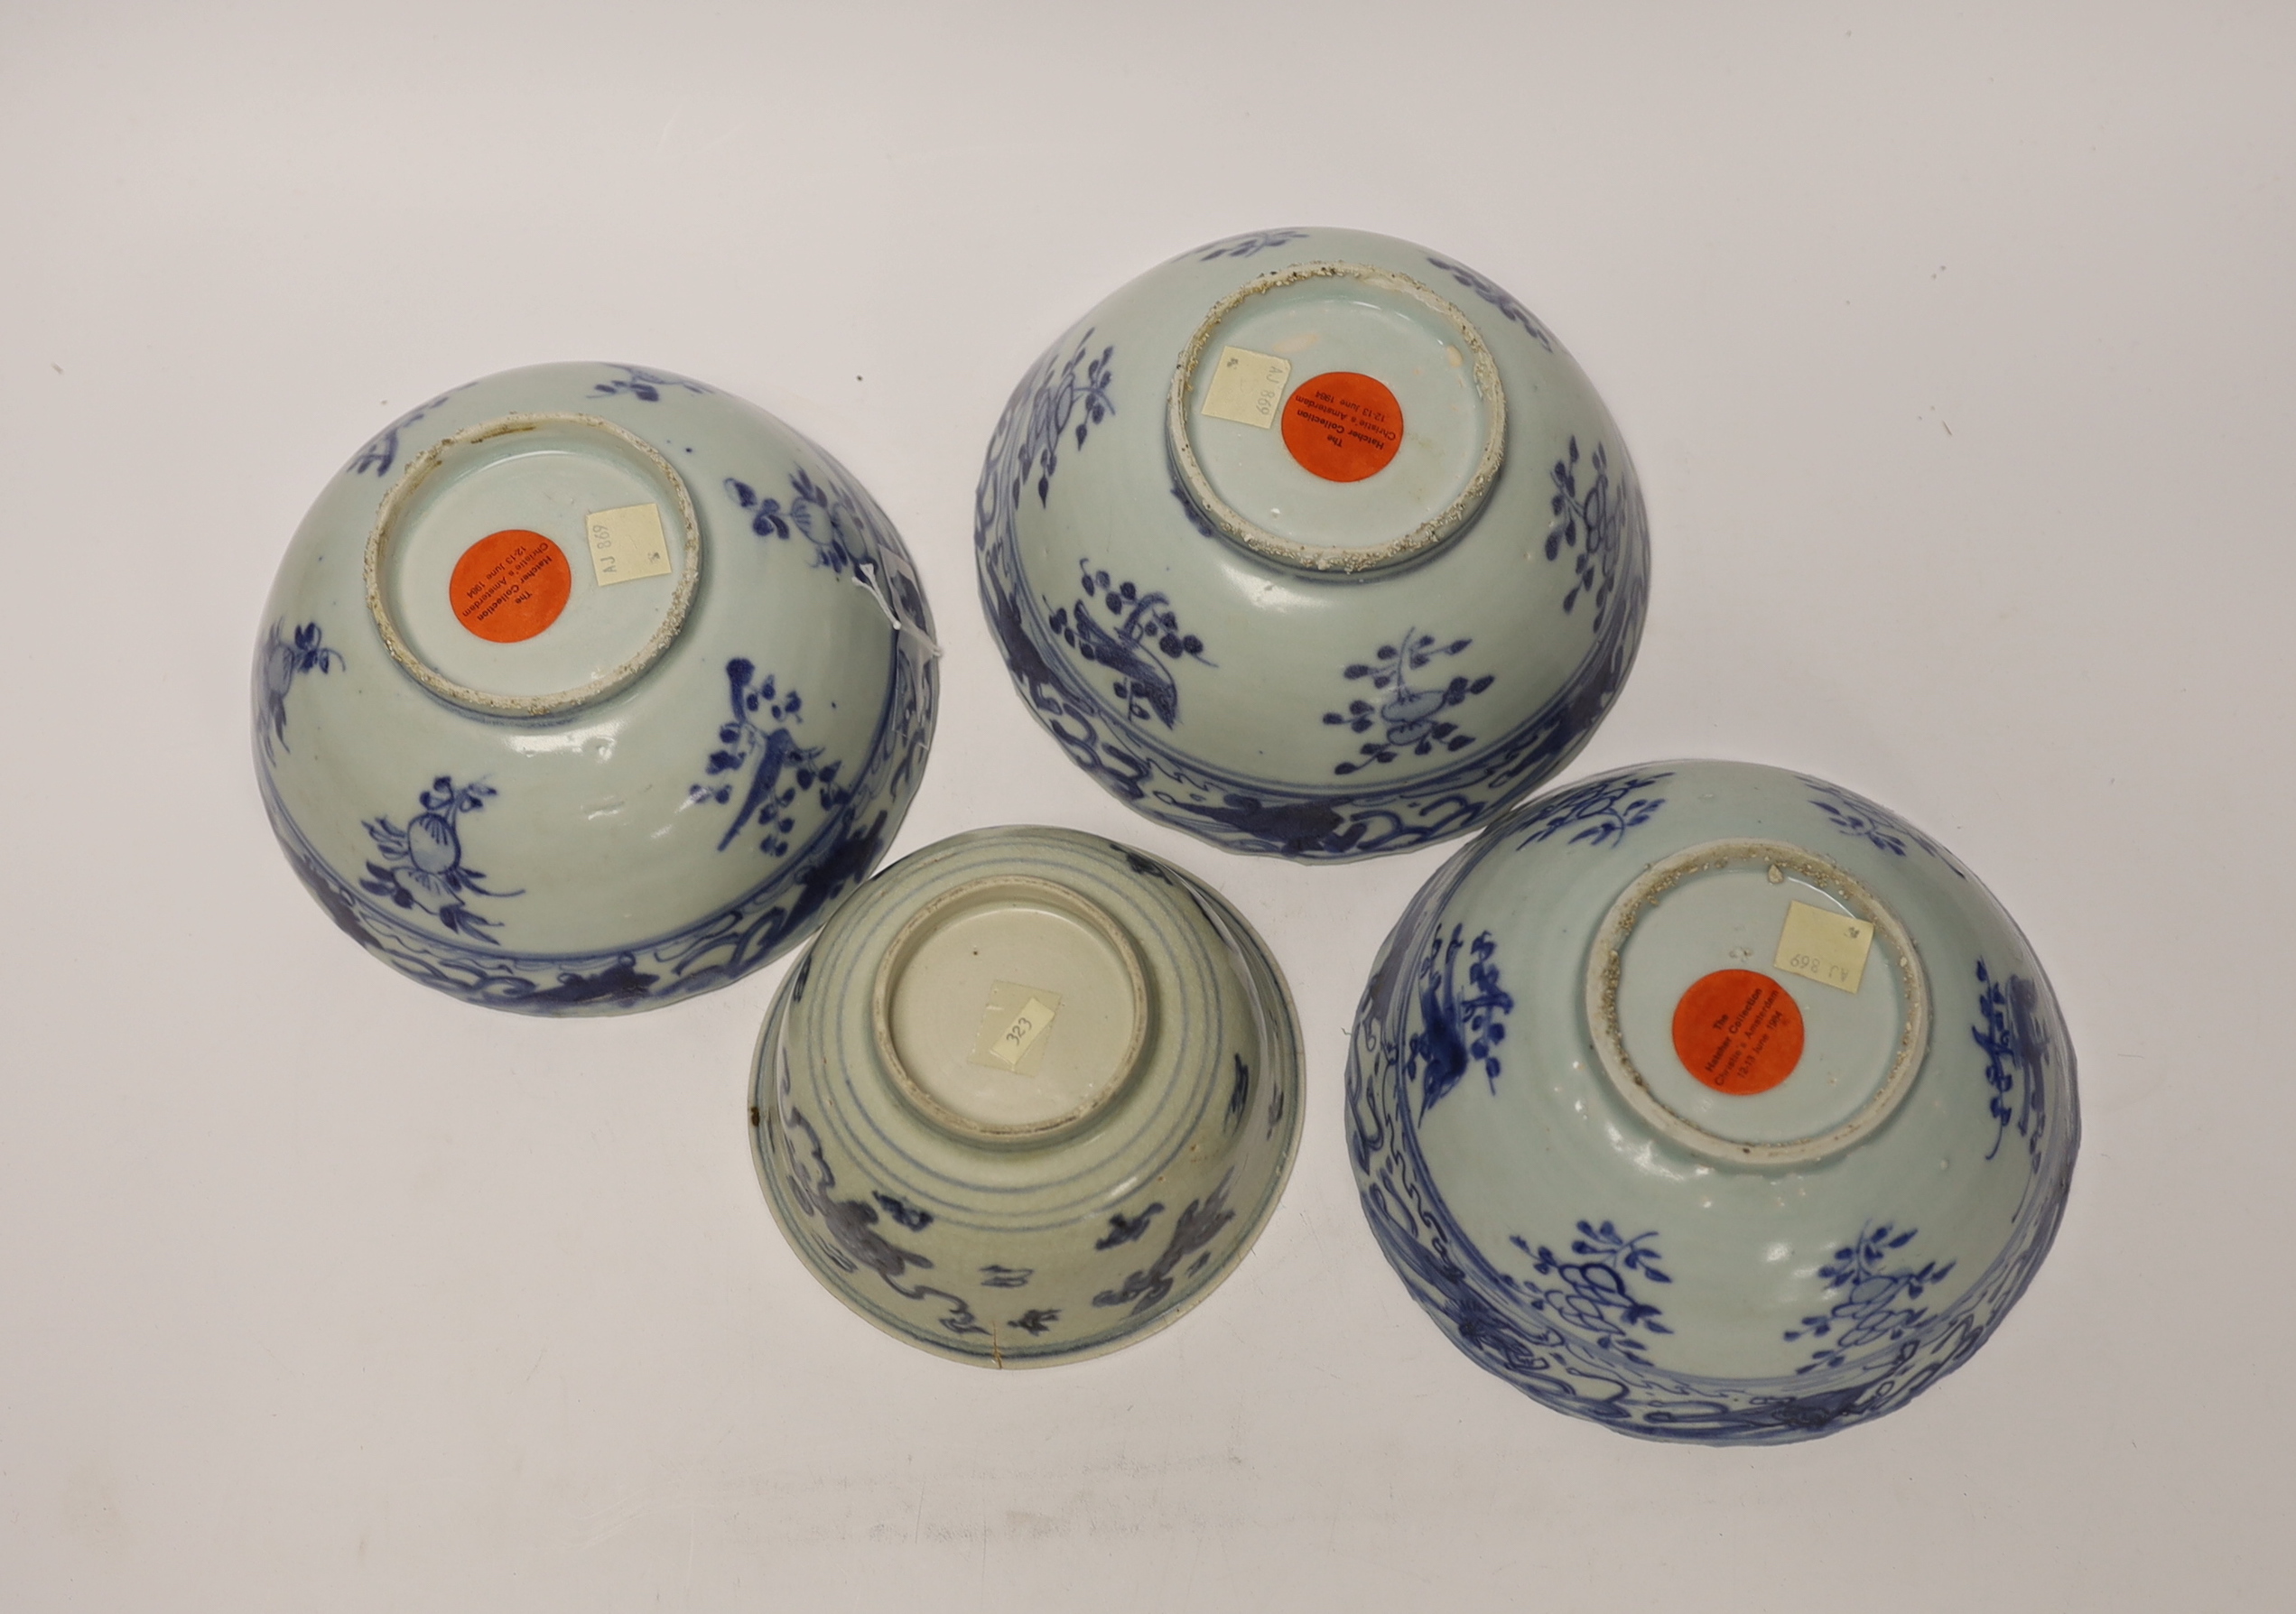 Four 16th/17th century Chinese Ming blue and white bowls, the three larger bowls from the Hatcher - Image 3 of 3